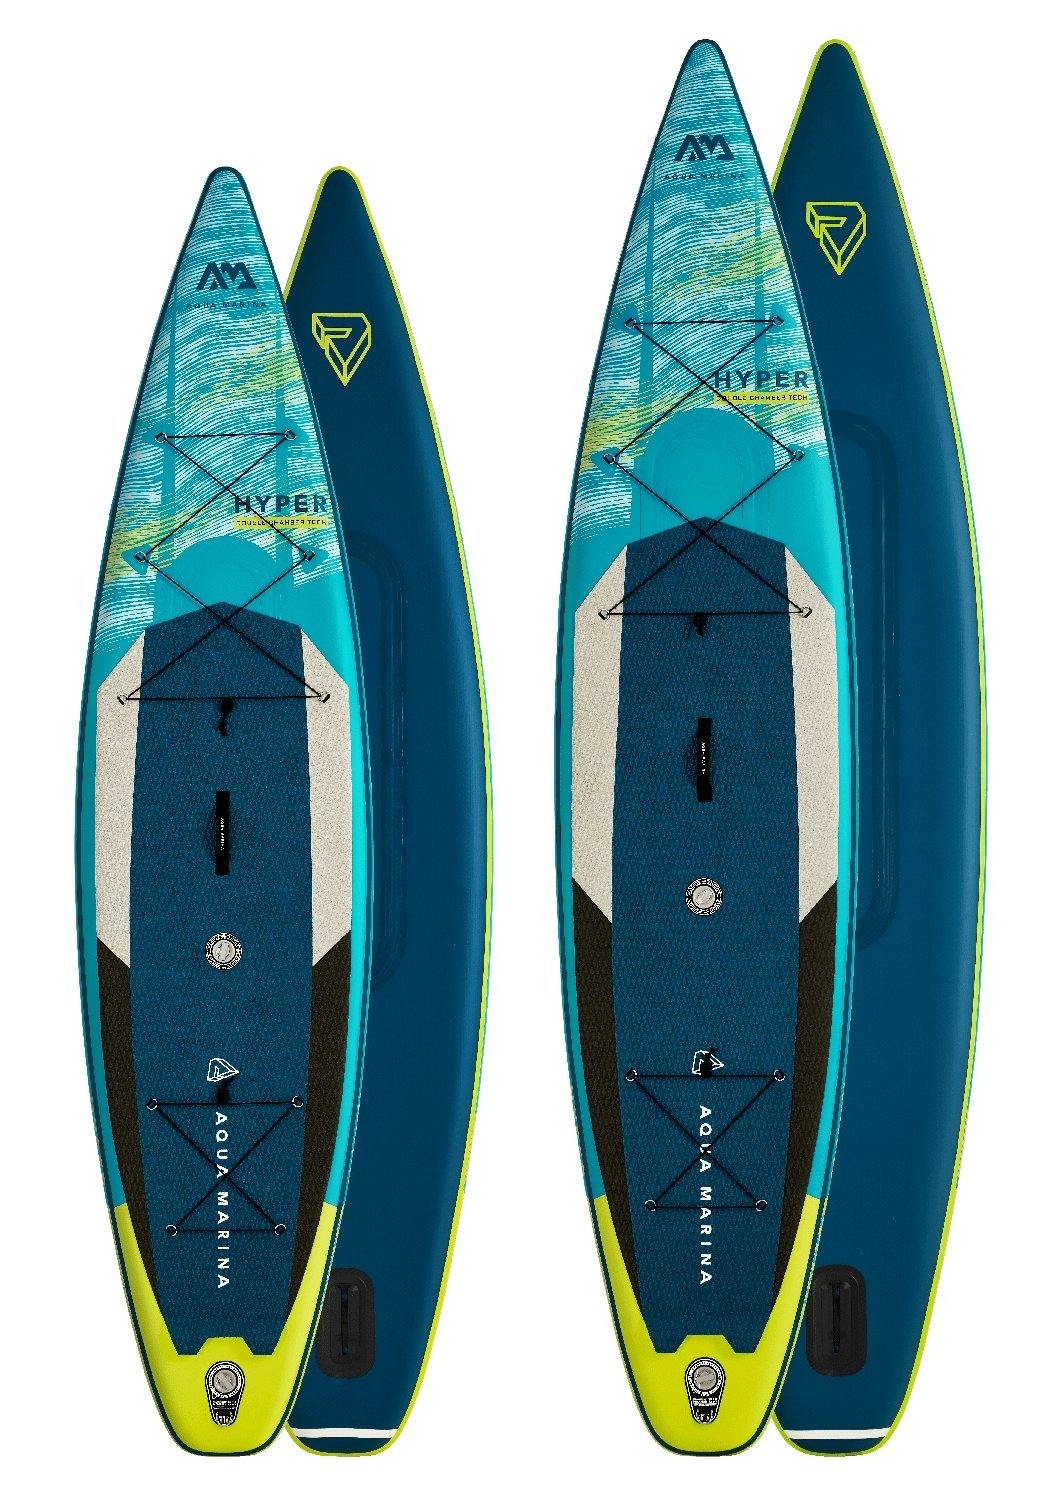 Hyper 12'6'' Touring iSUP Paddle Board - Dti Direct USA